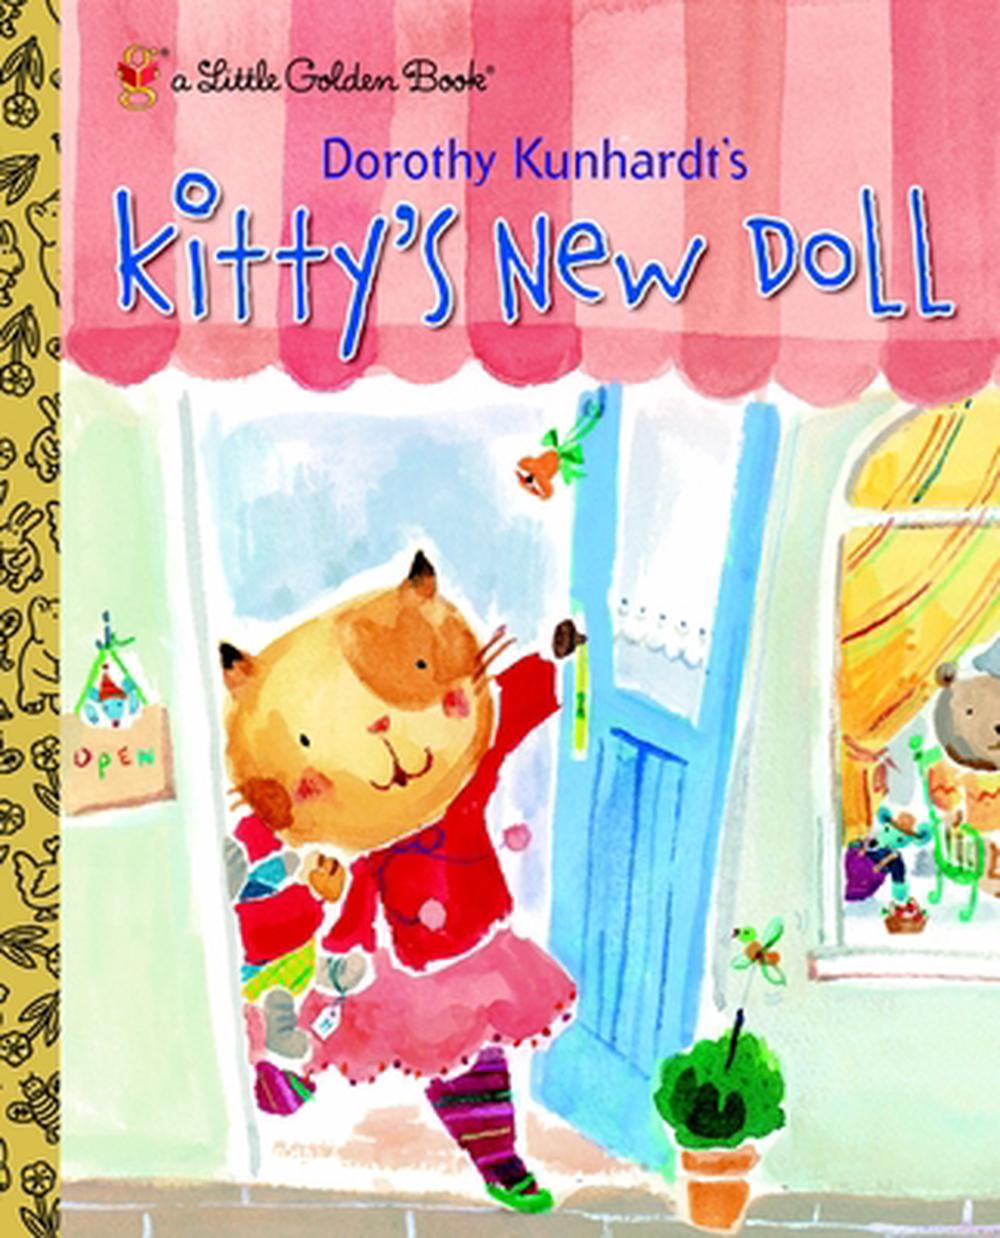 The Doll and the Kitten by Dare Wright